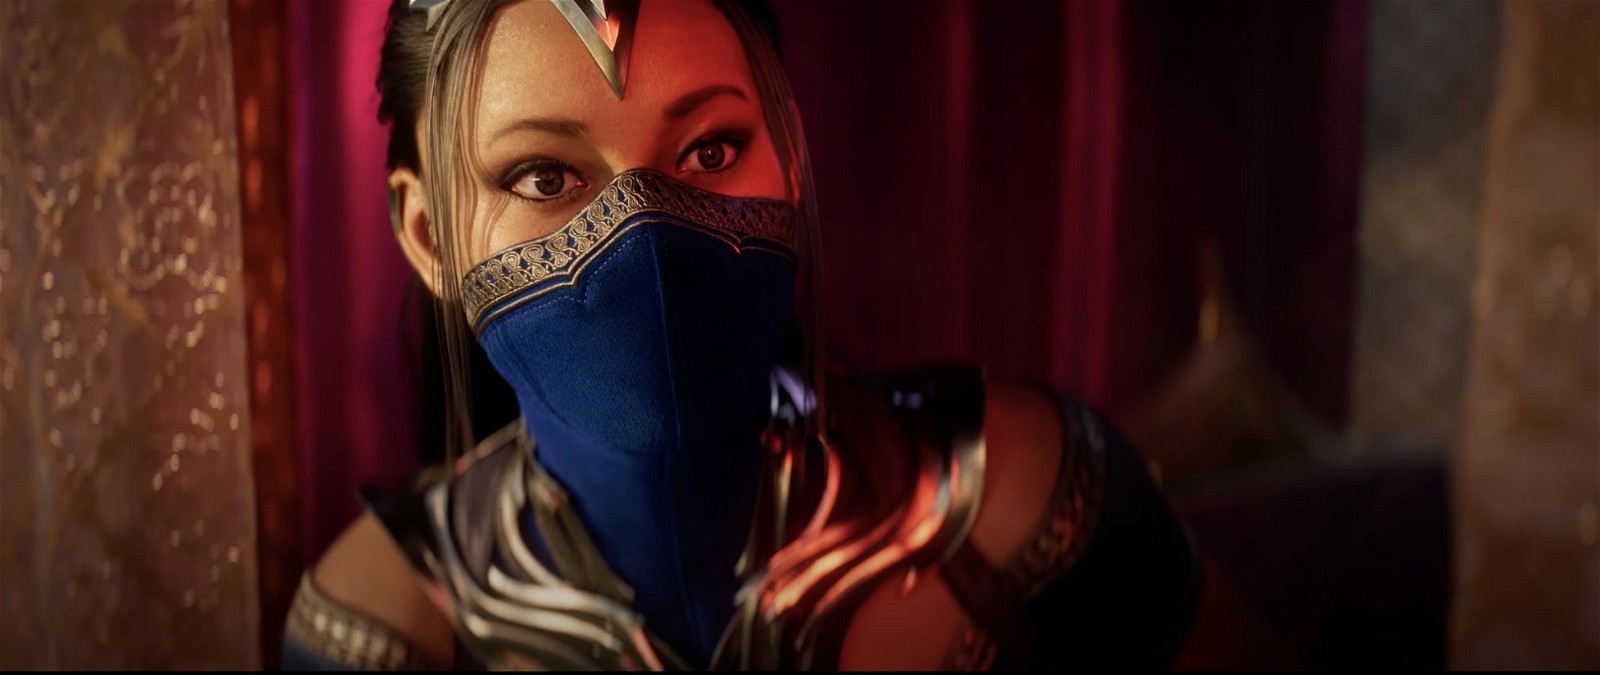 FIrst glance from Mortal Kombat 1